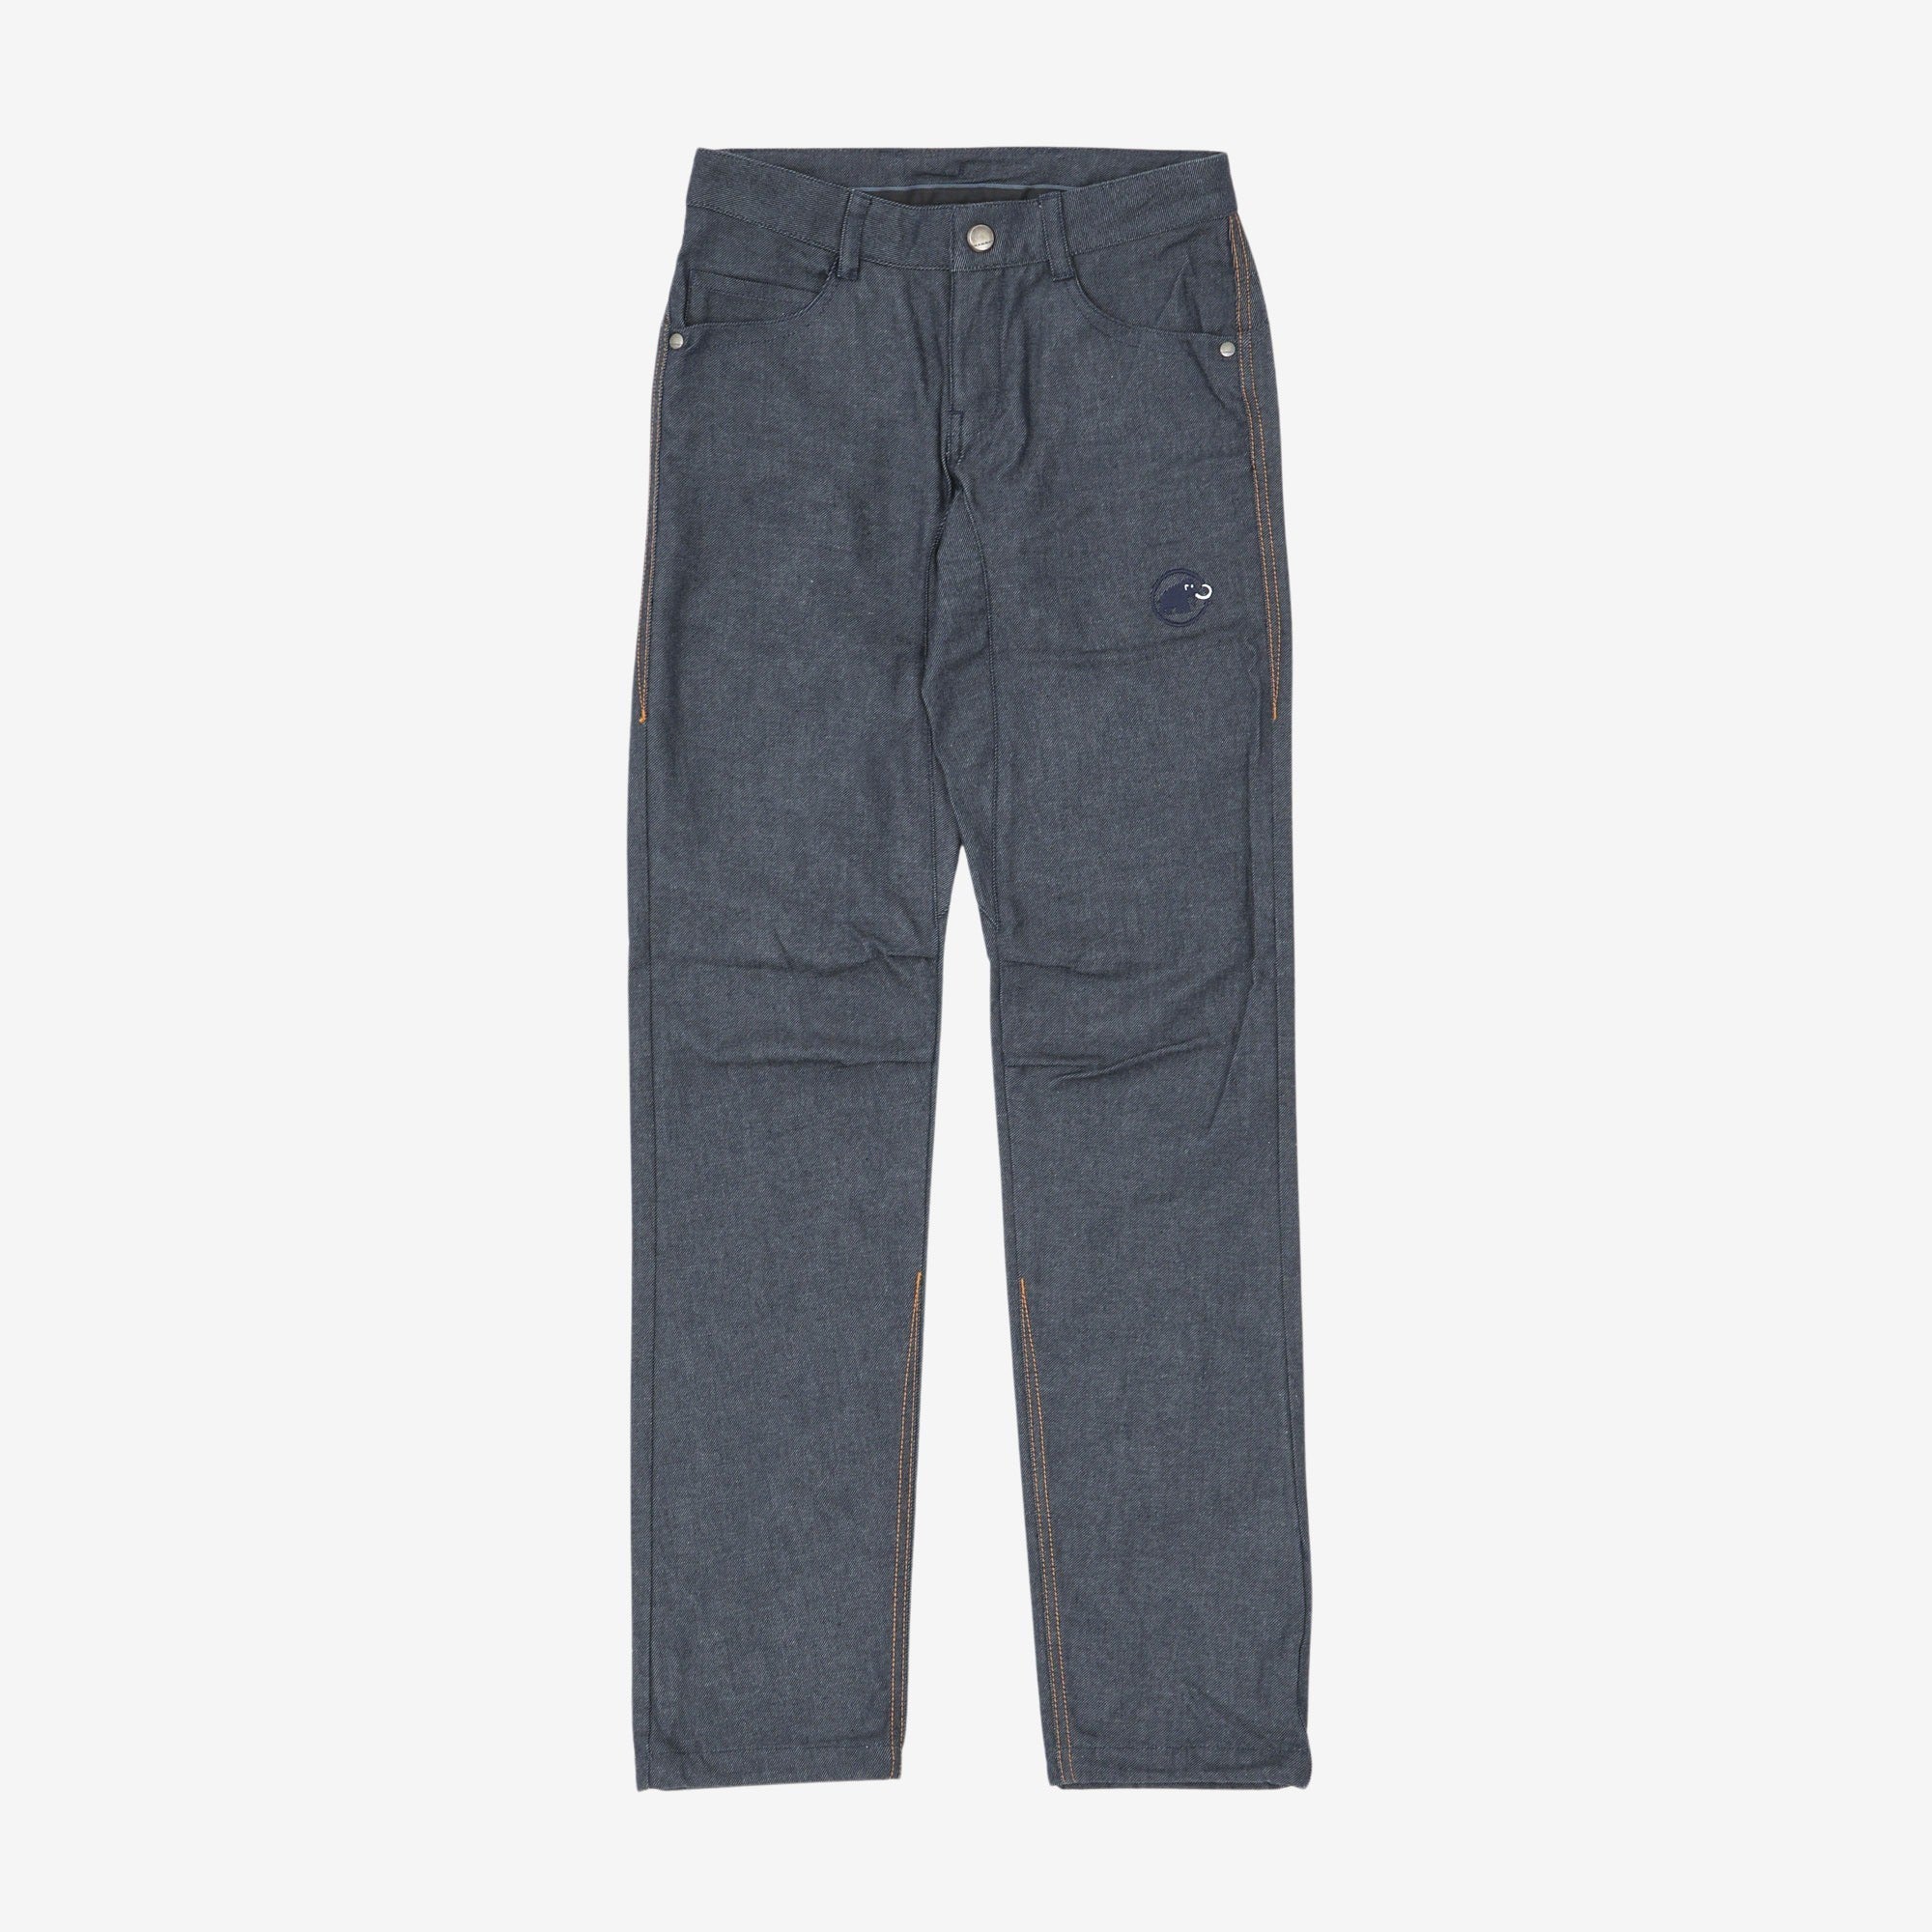 Technical Hiking Jeans